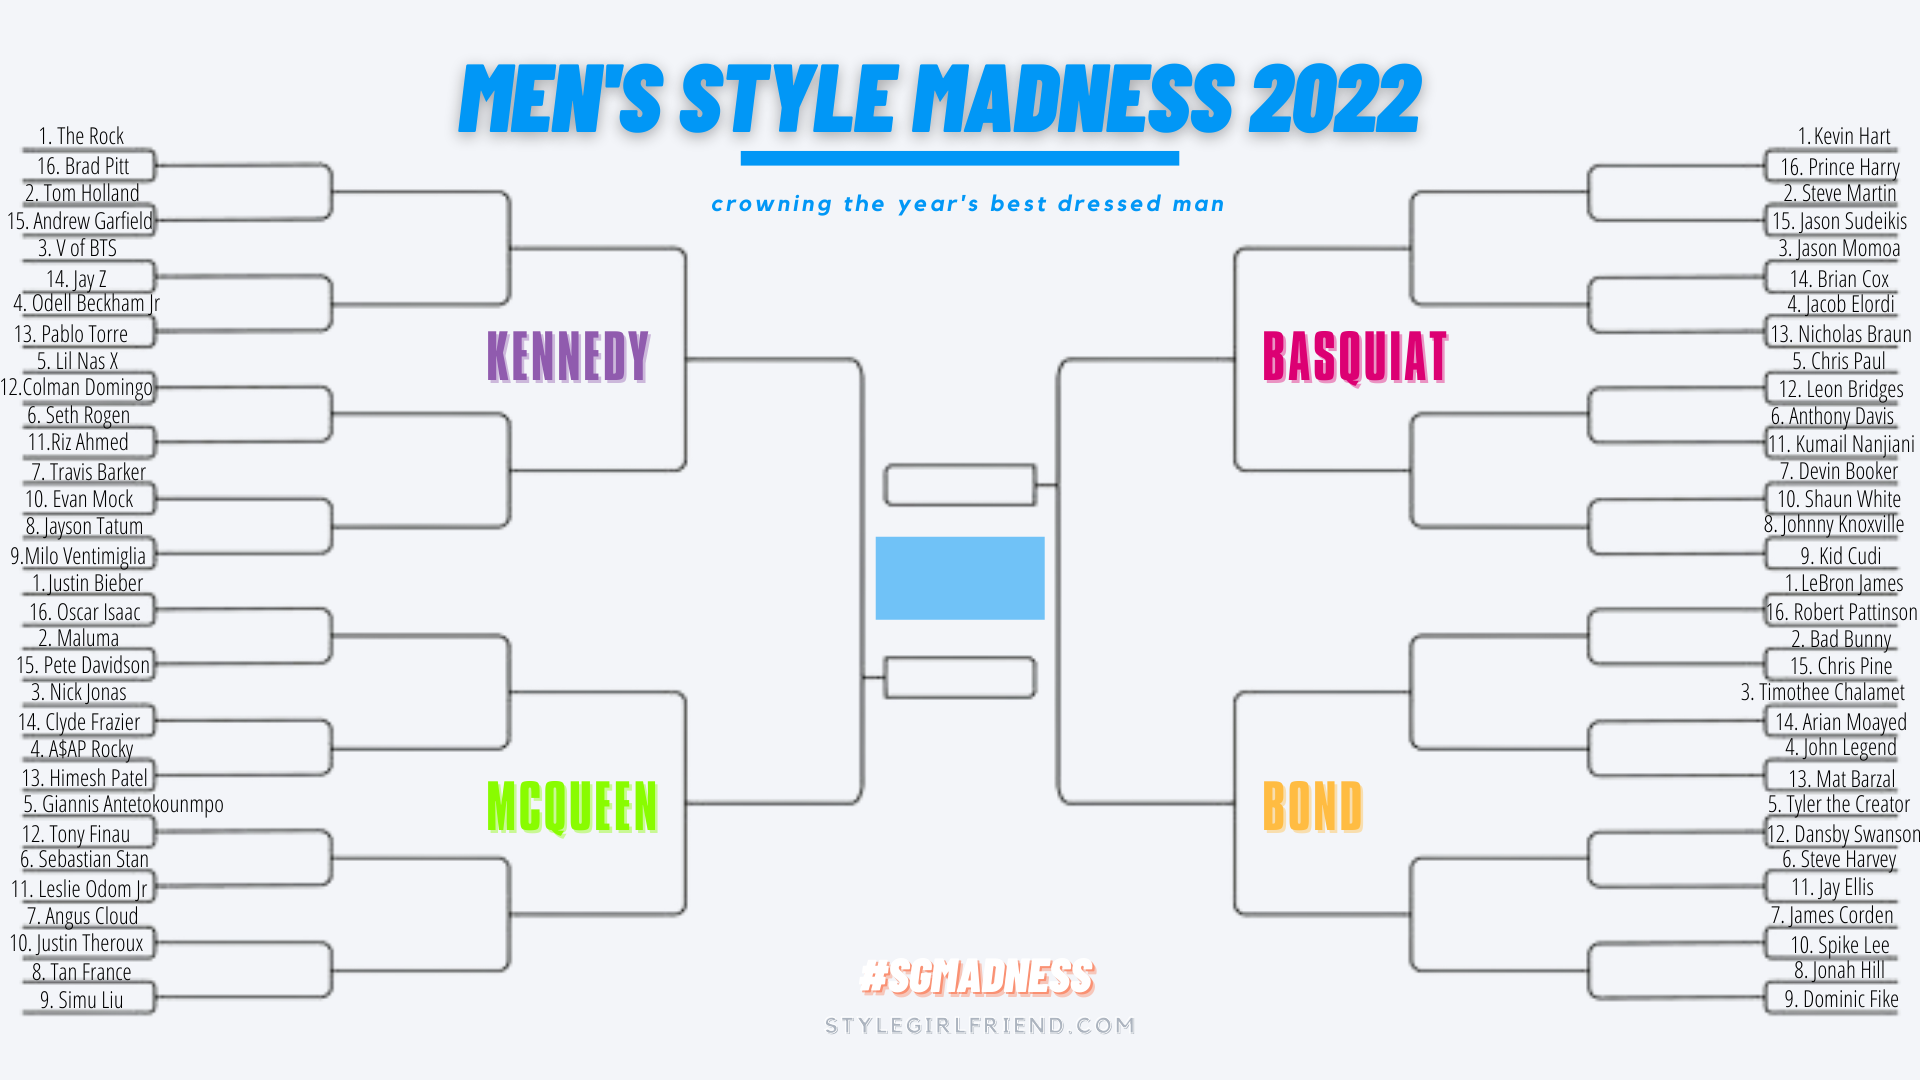 SG Madness 2022 bracket of the best dressed celebrities of 2022